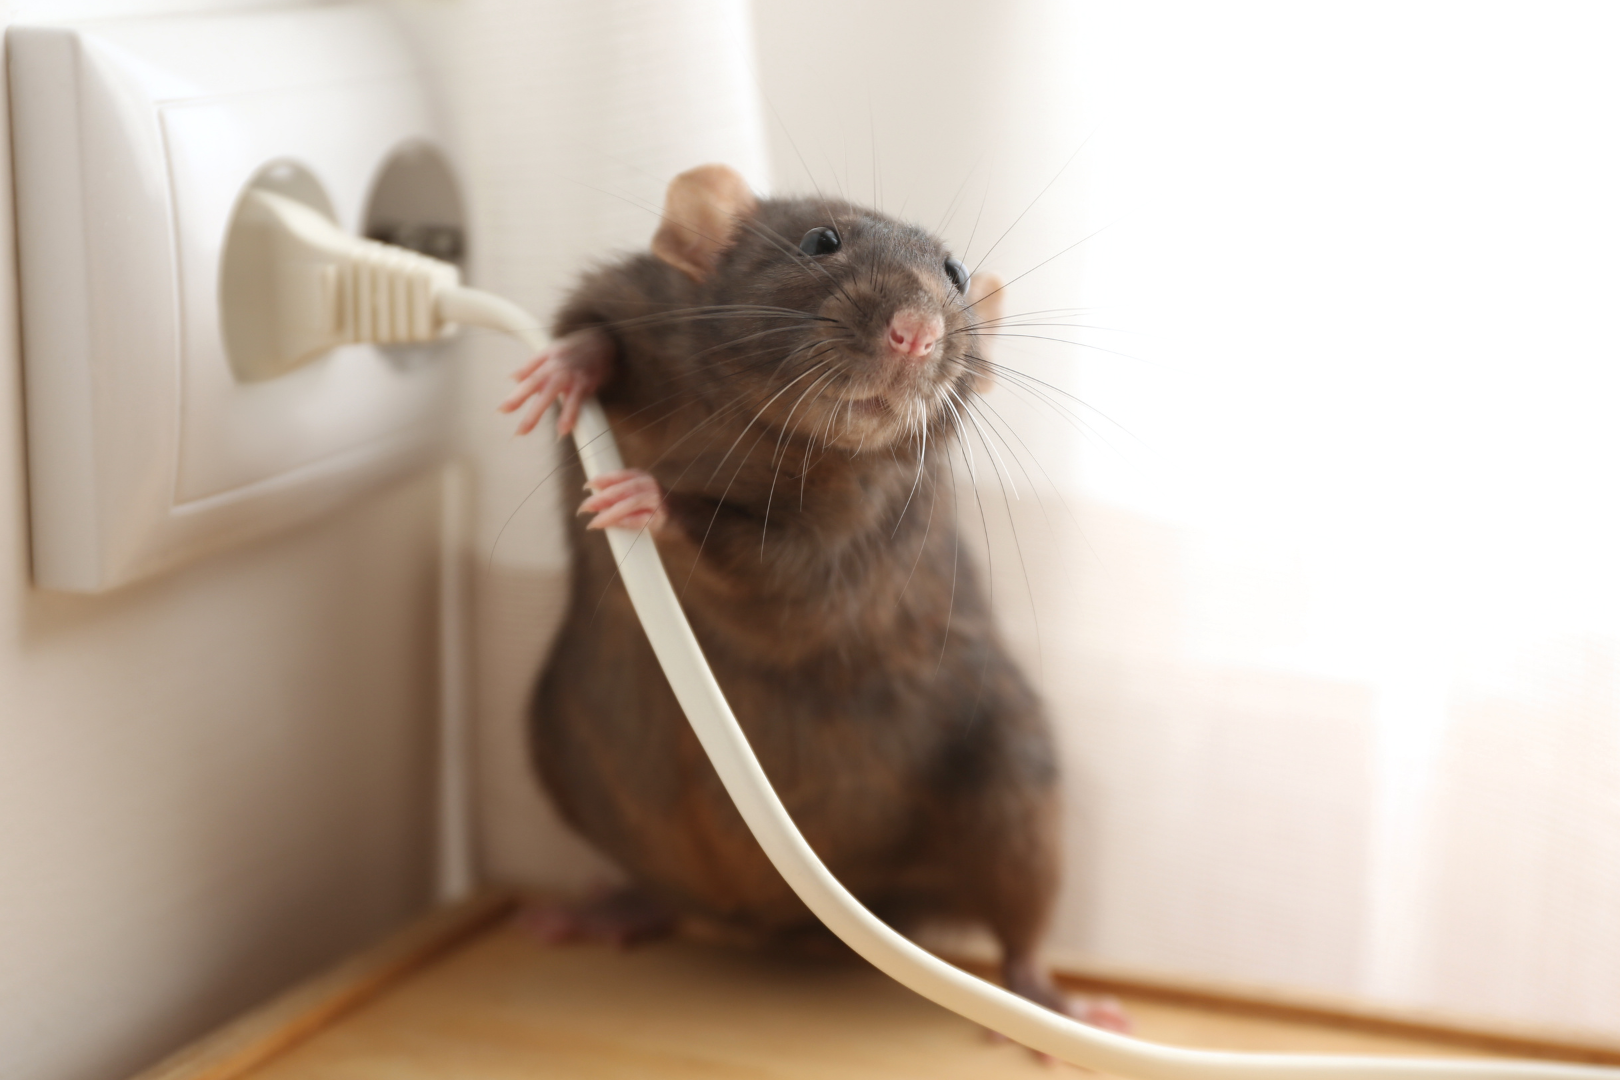 call an exterminator at the first sign of a mouse infestation